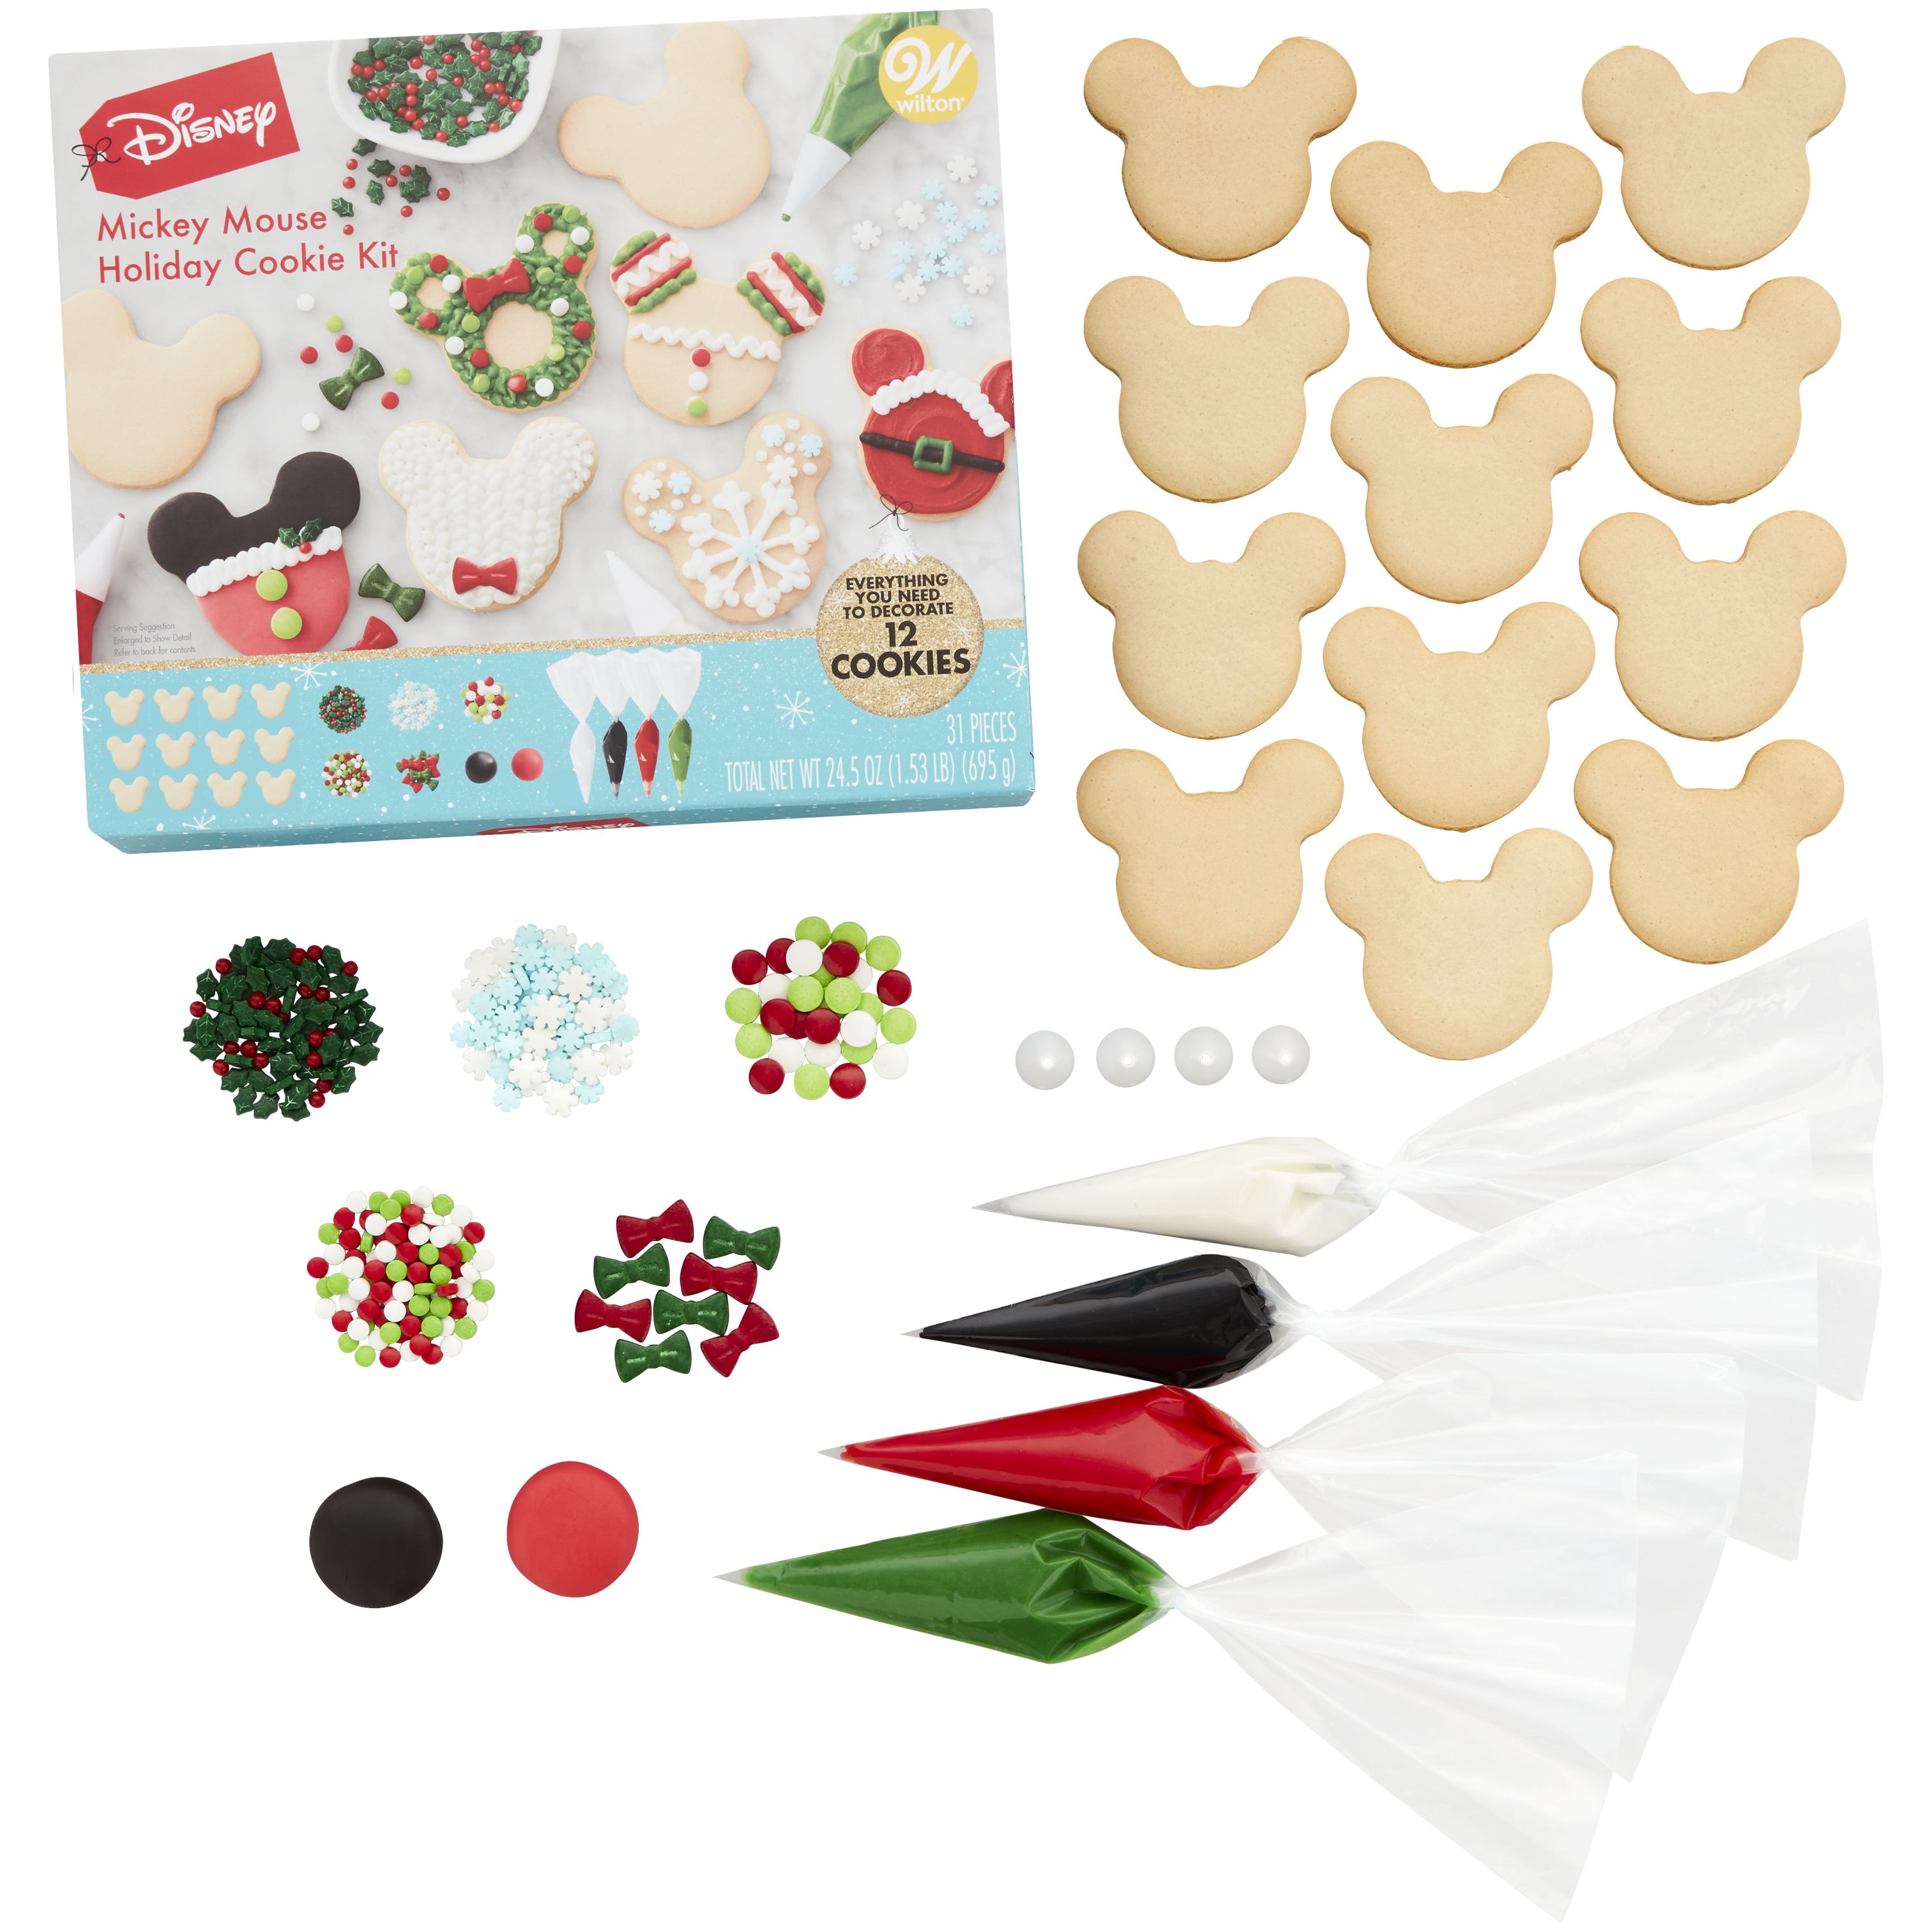 Wilton Pre-Baked Ready to Decorate Disney Mickey Mouse Holiday Cookie Kit, 31-Piece | Walmart (US)